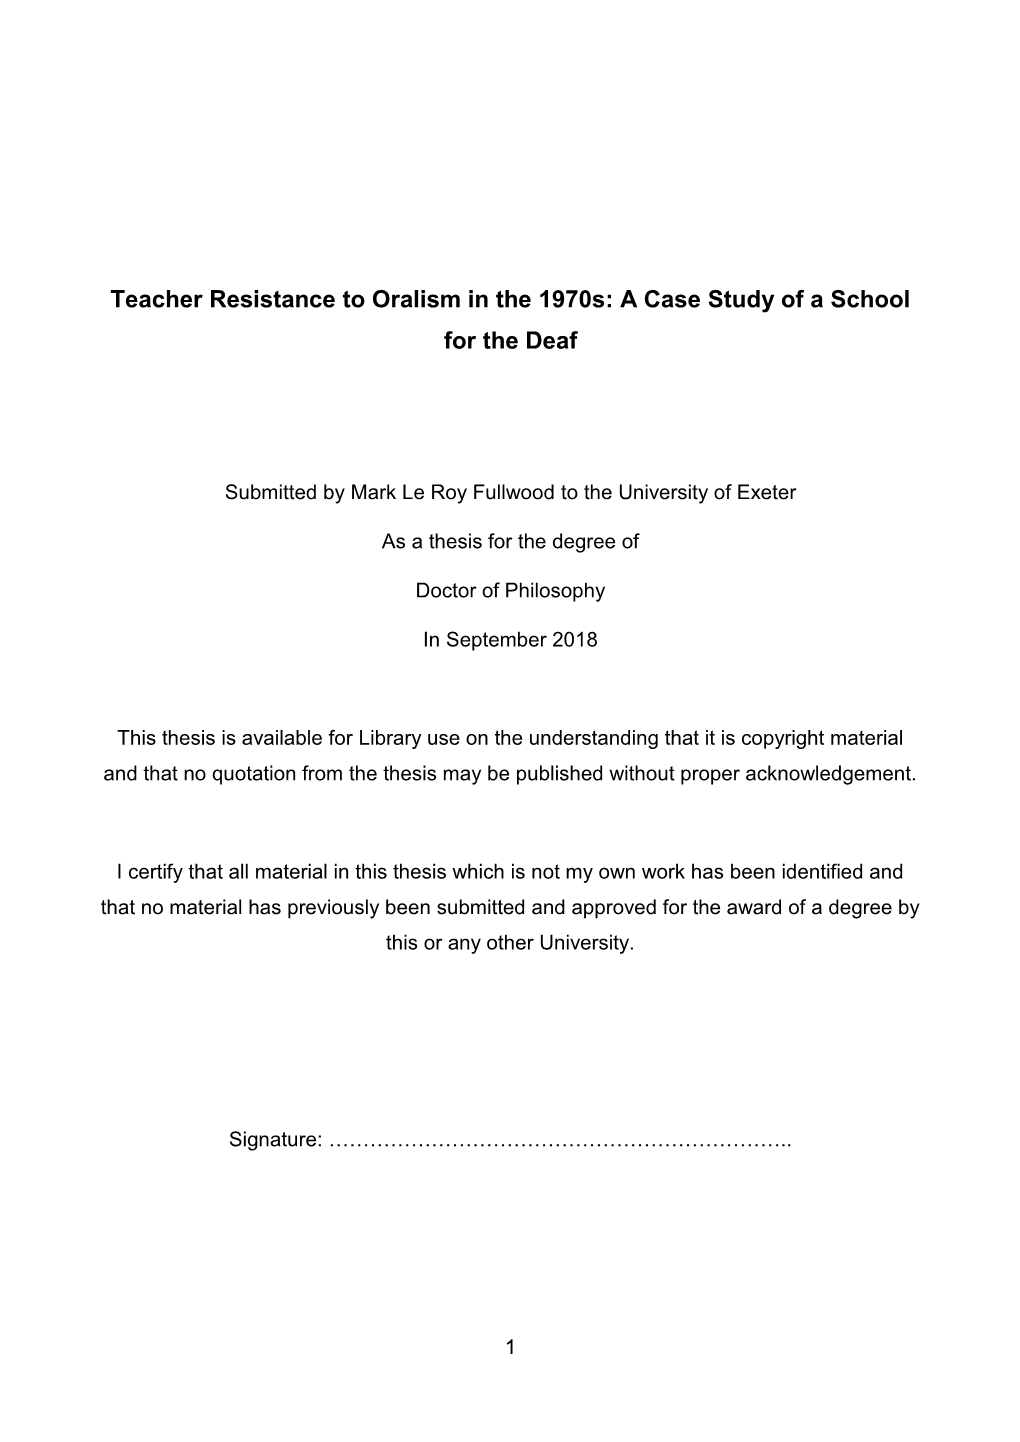 Teacher Resistance to Oralism in the 1970S: a Case Study of a School for the Deaf